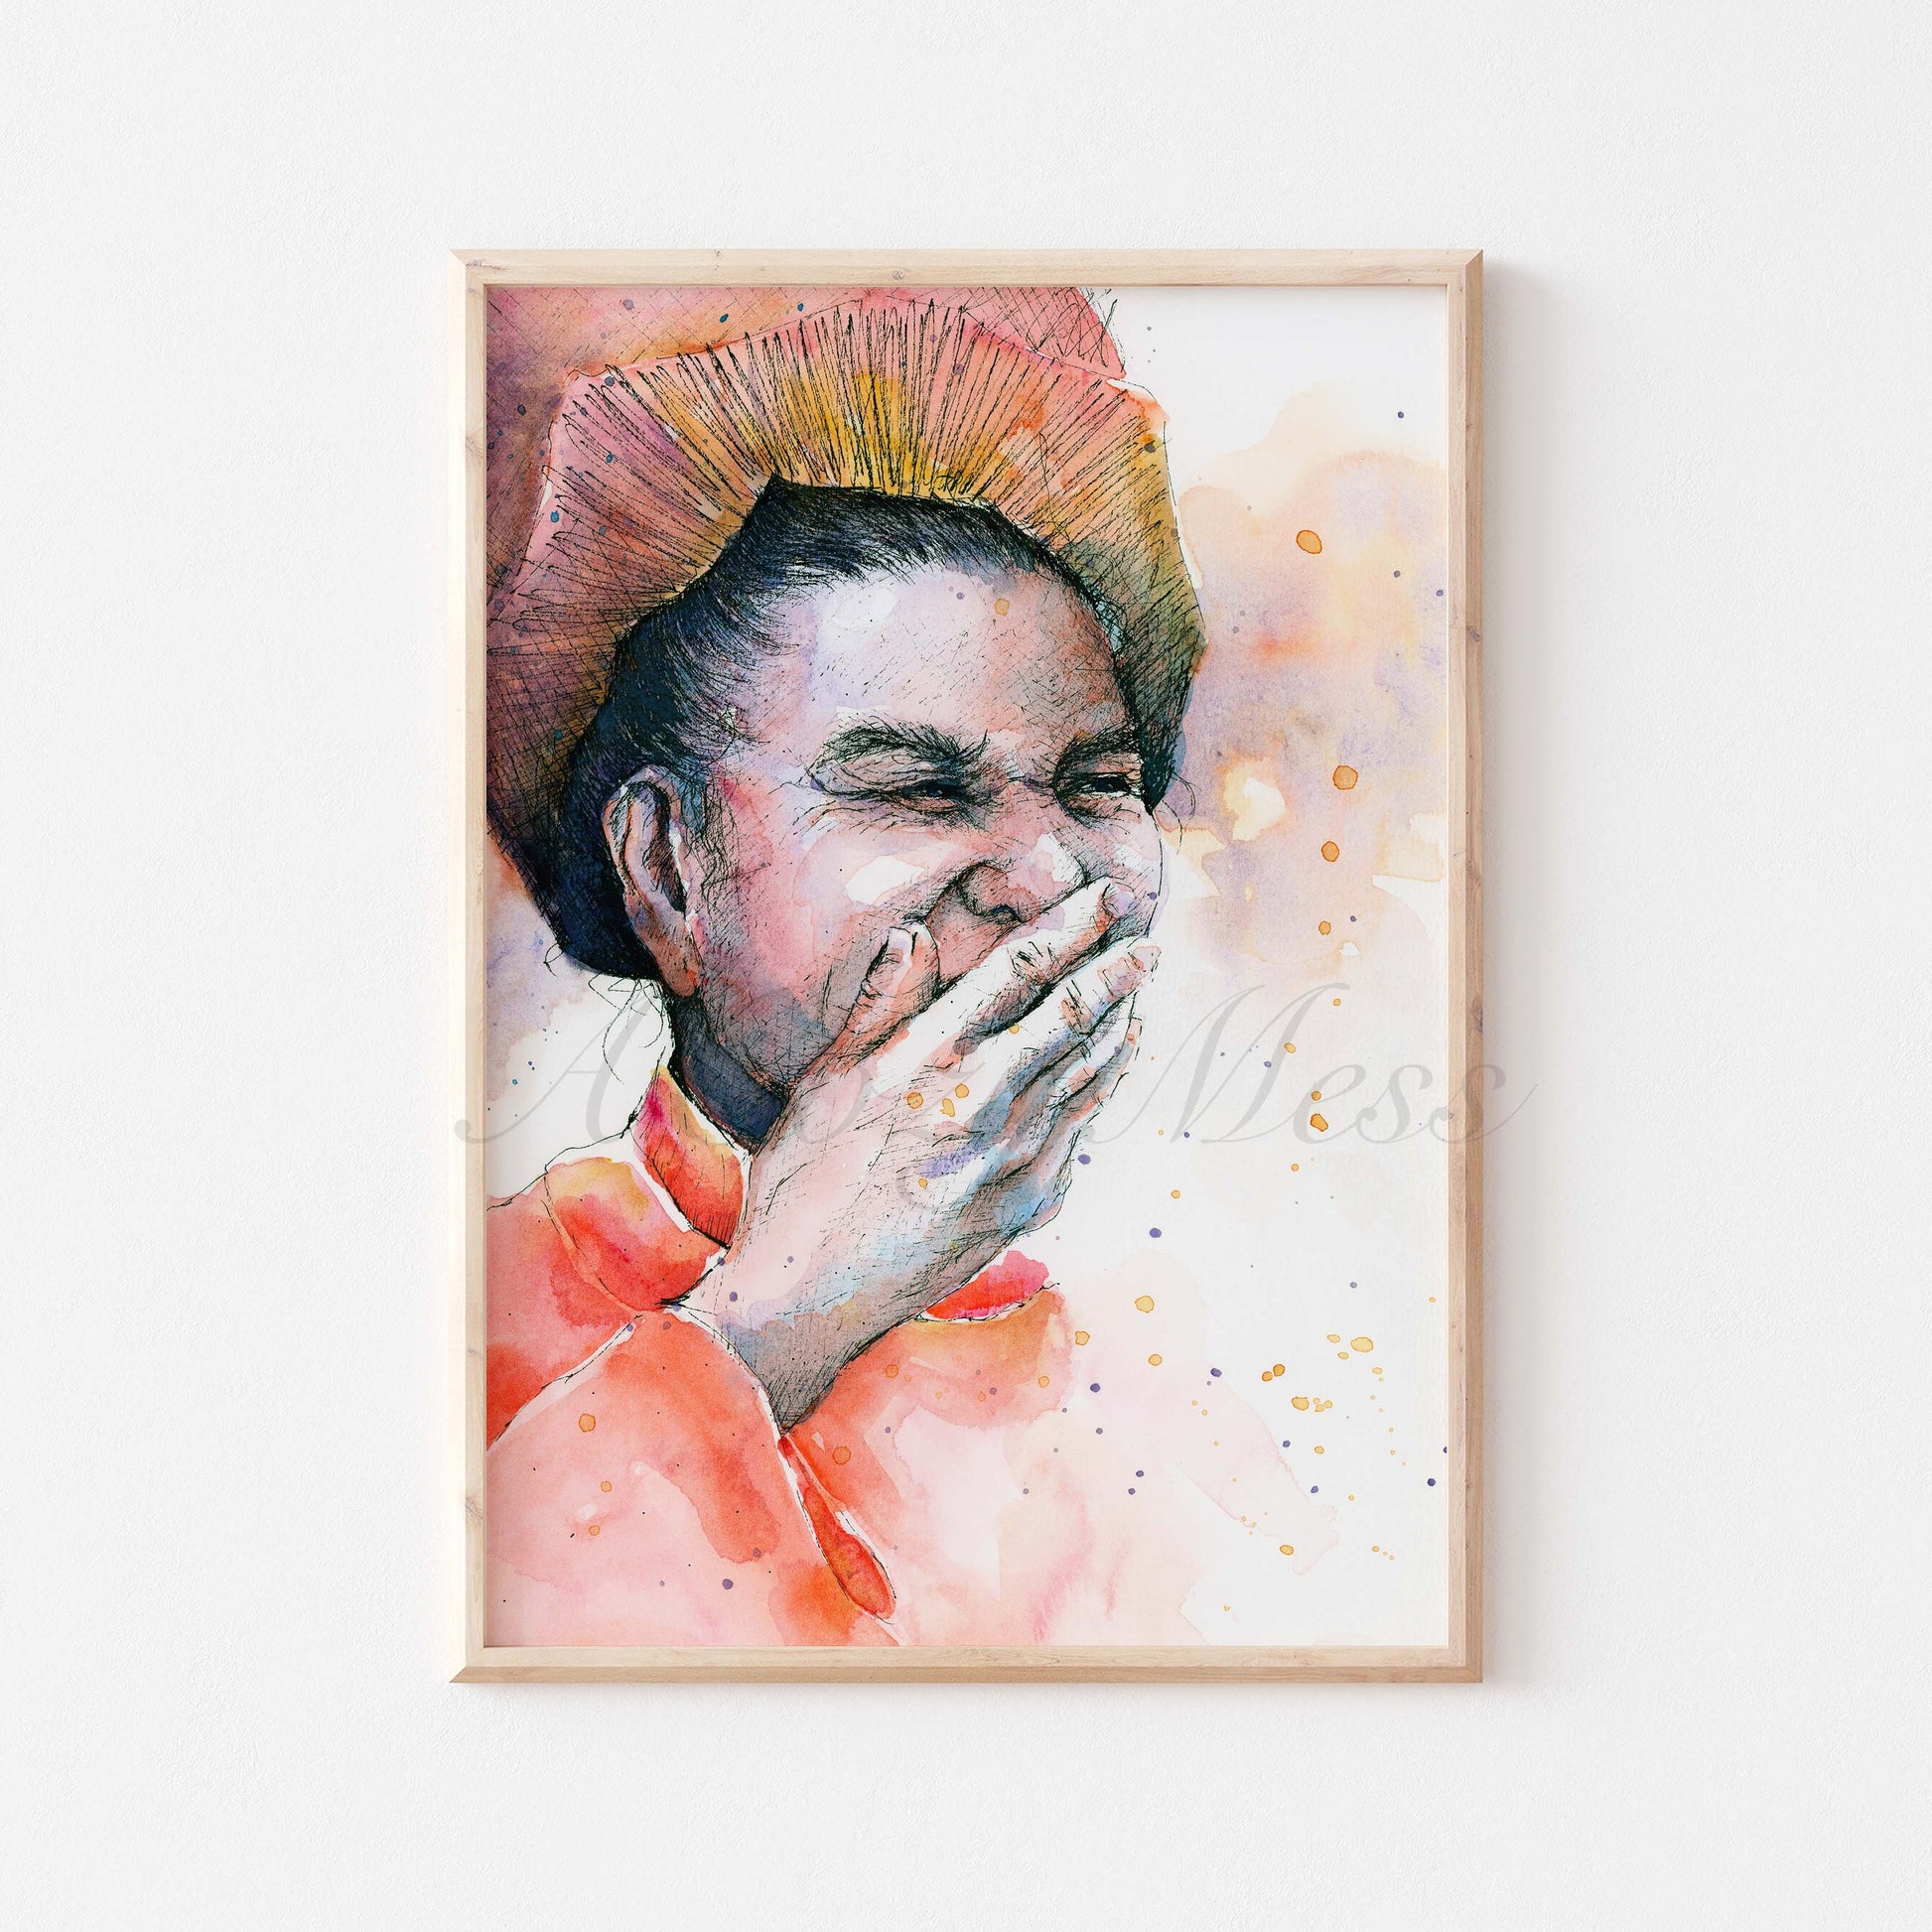 Poster of an Old Woman laughing in orange, yellow & purple in light wood frame display.